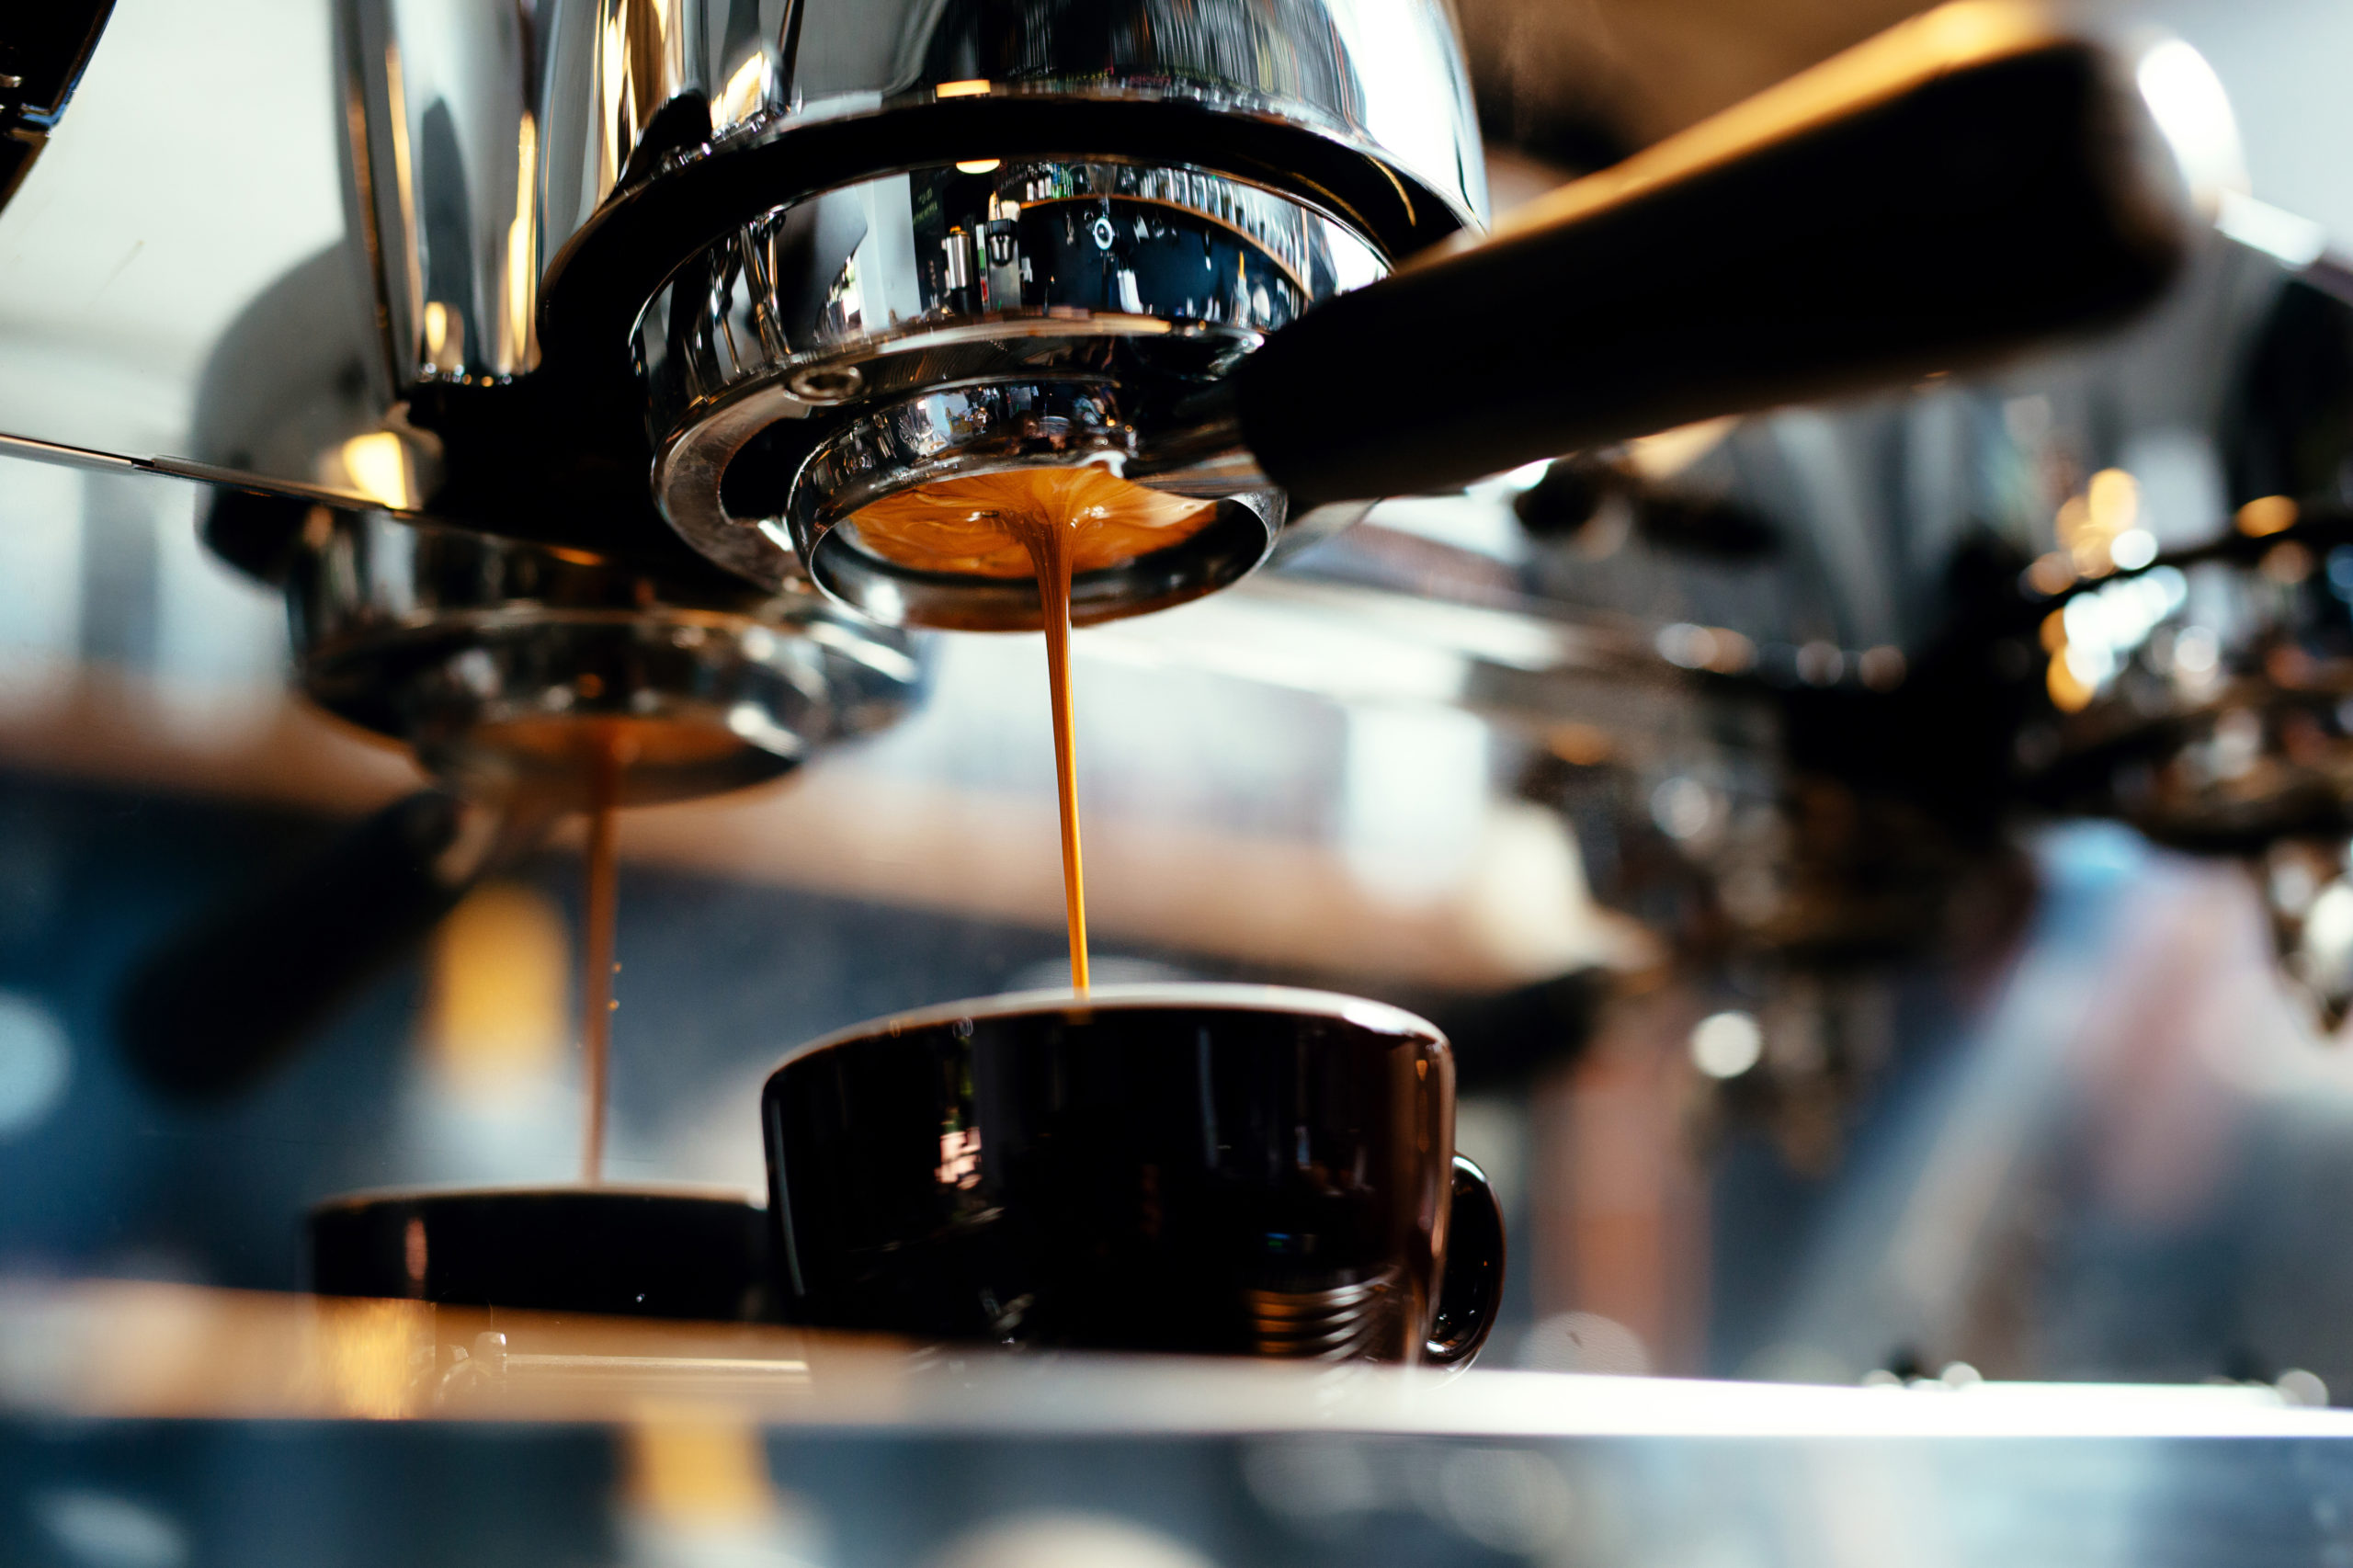 Protected: 10 Amazing Facts About Espresso